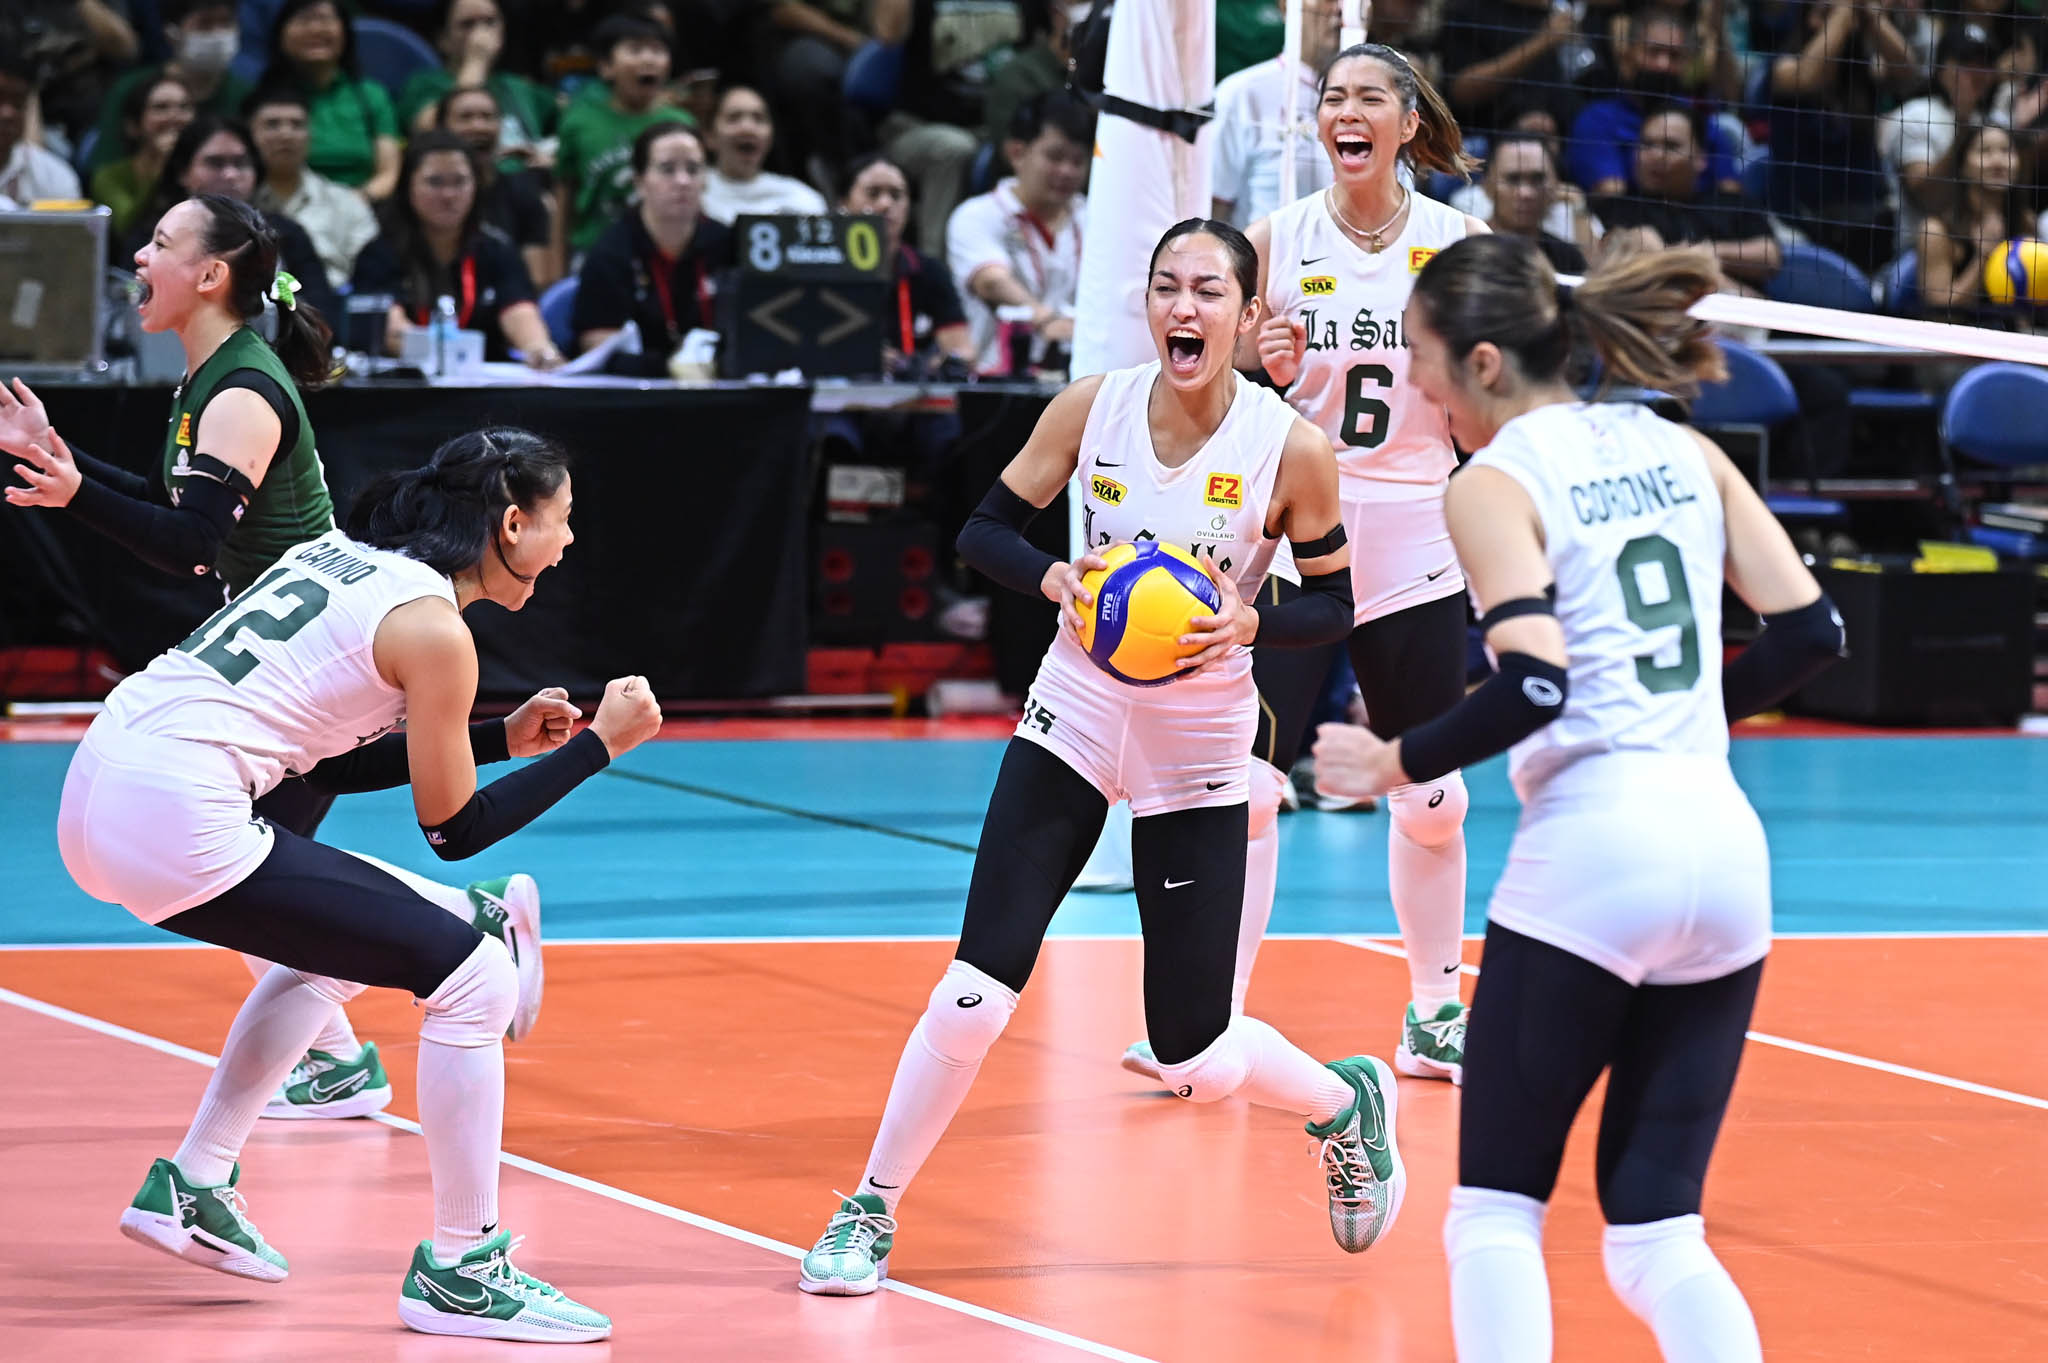 DLSU celebrate win in rivalry match-up against NU in UAAP 86 Women's Volleyball action